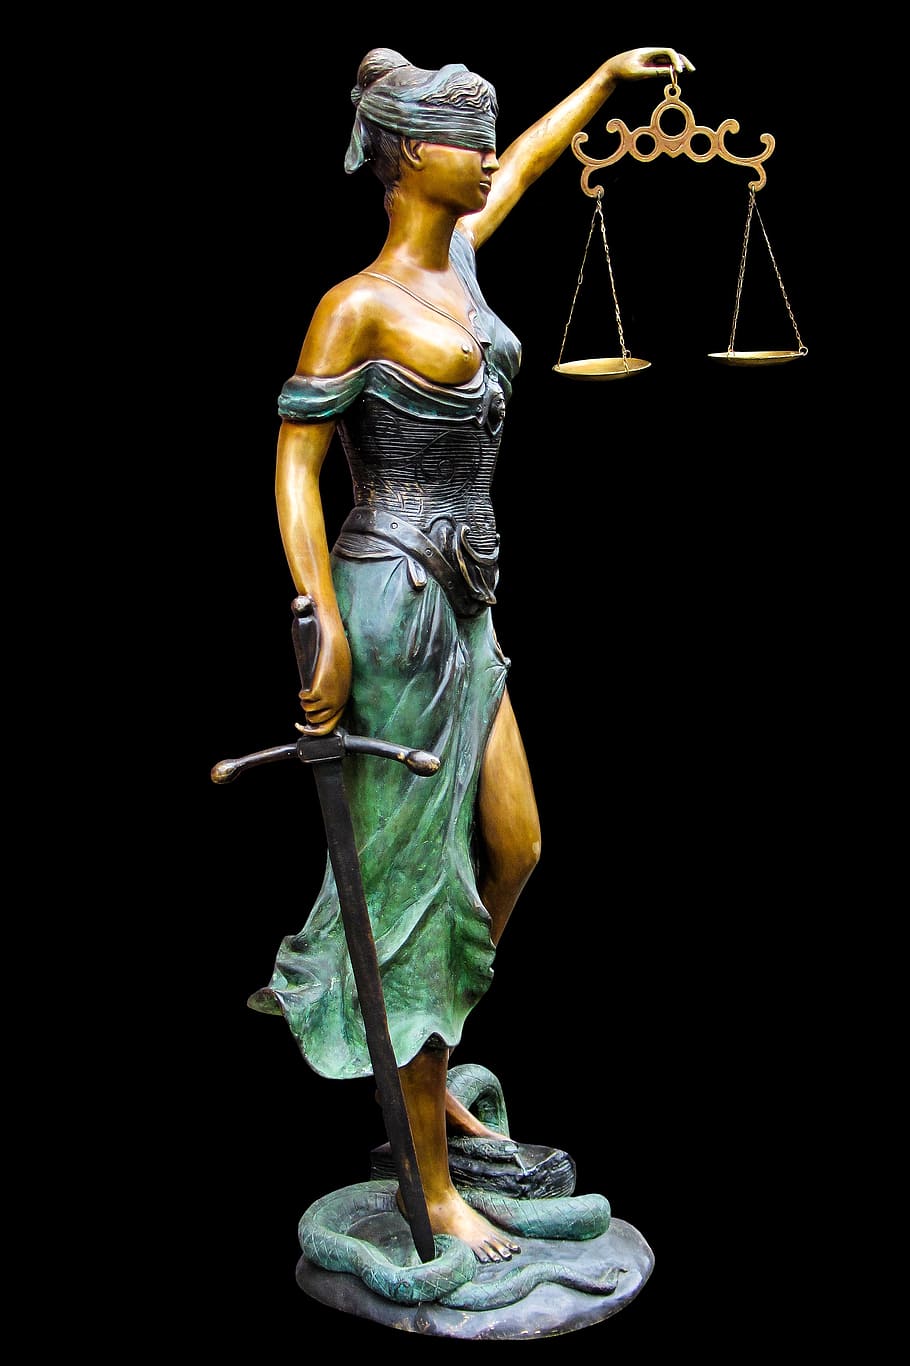 Lady Justice 1080p 2k 4k 5k Hd Wallpapers Free Download Wallpaper Flare